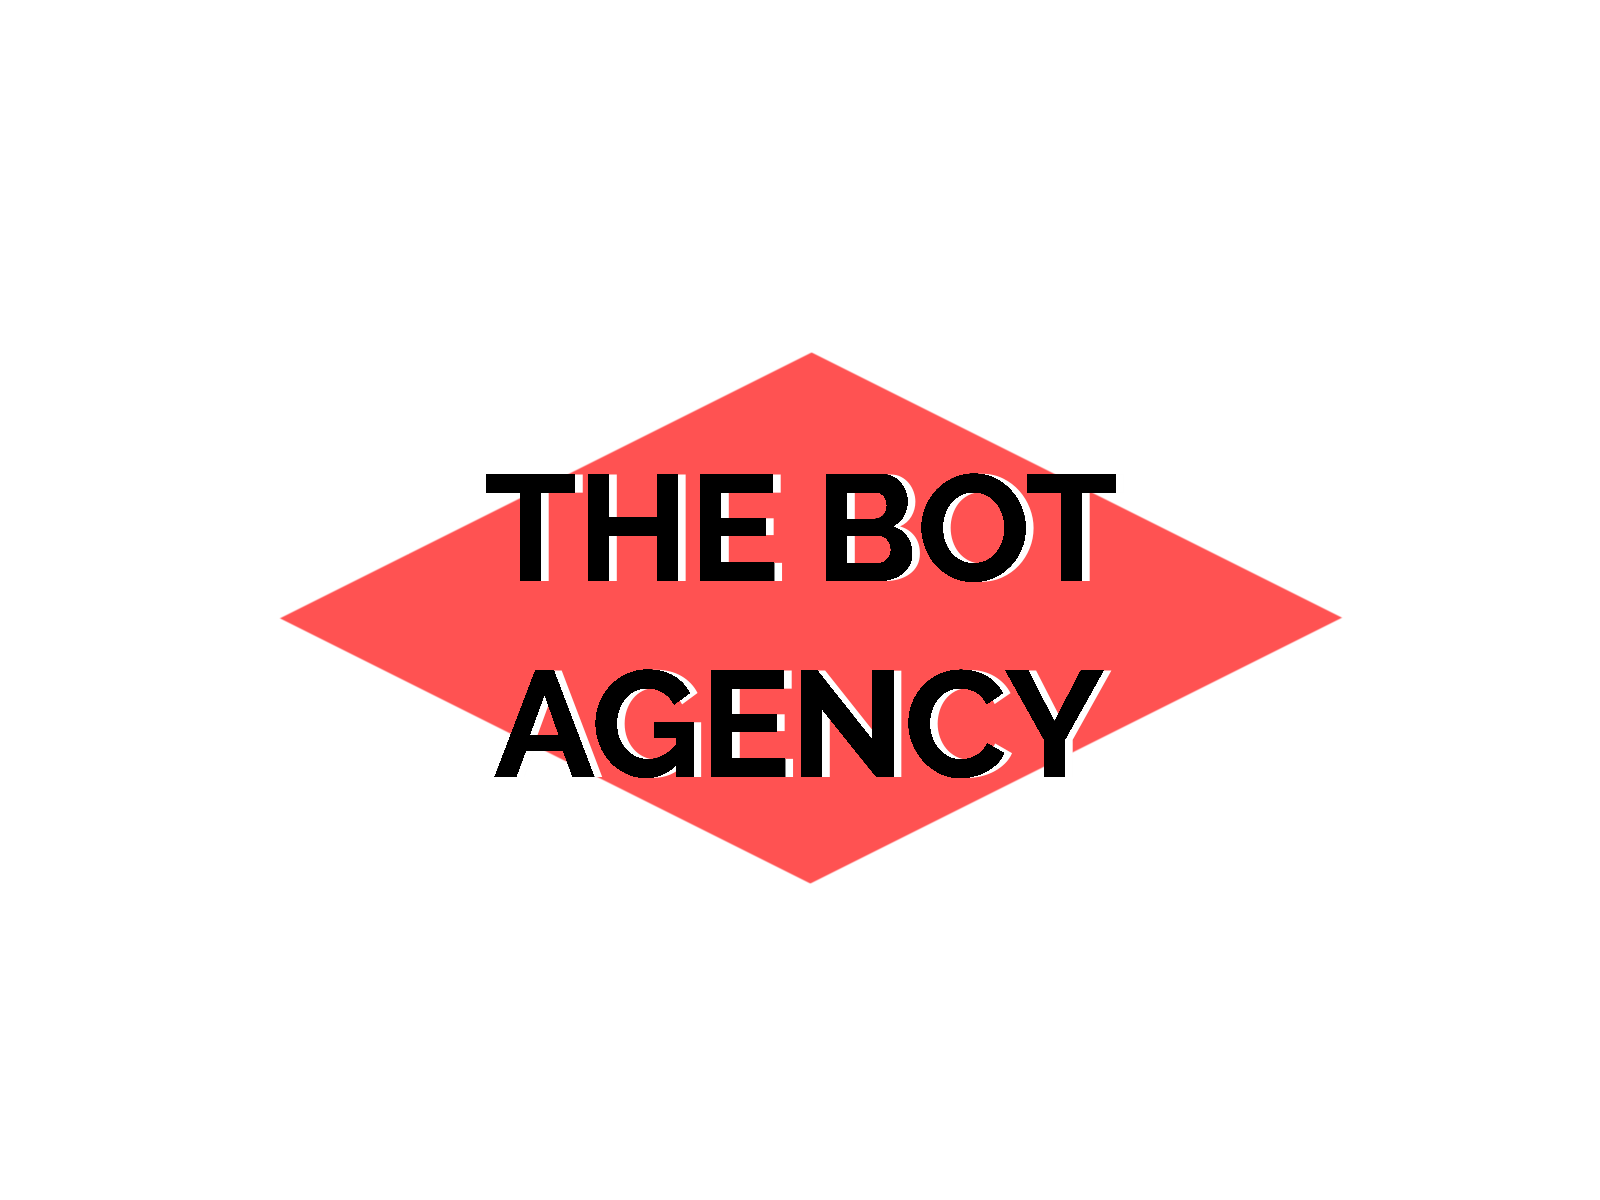 The Bot Agency